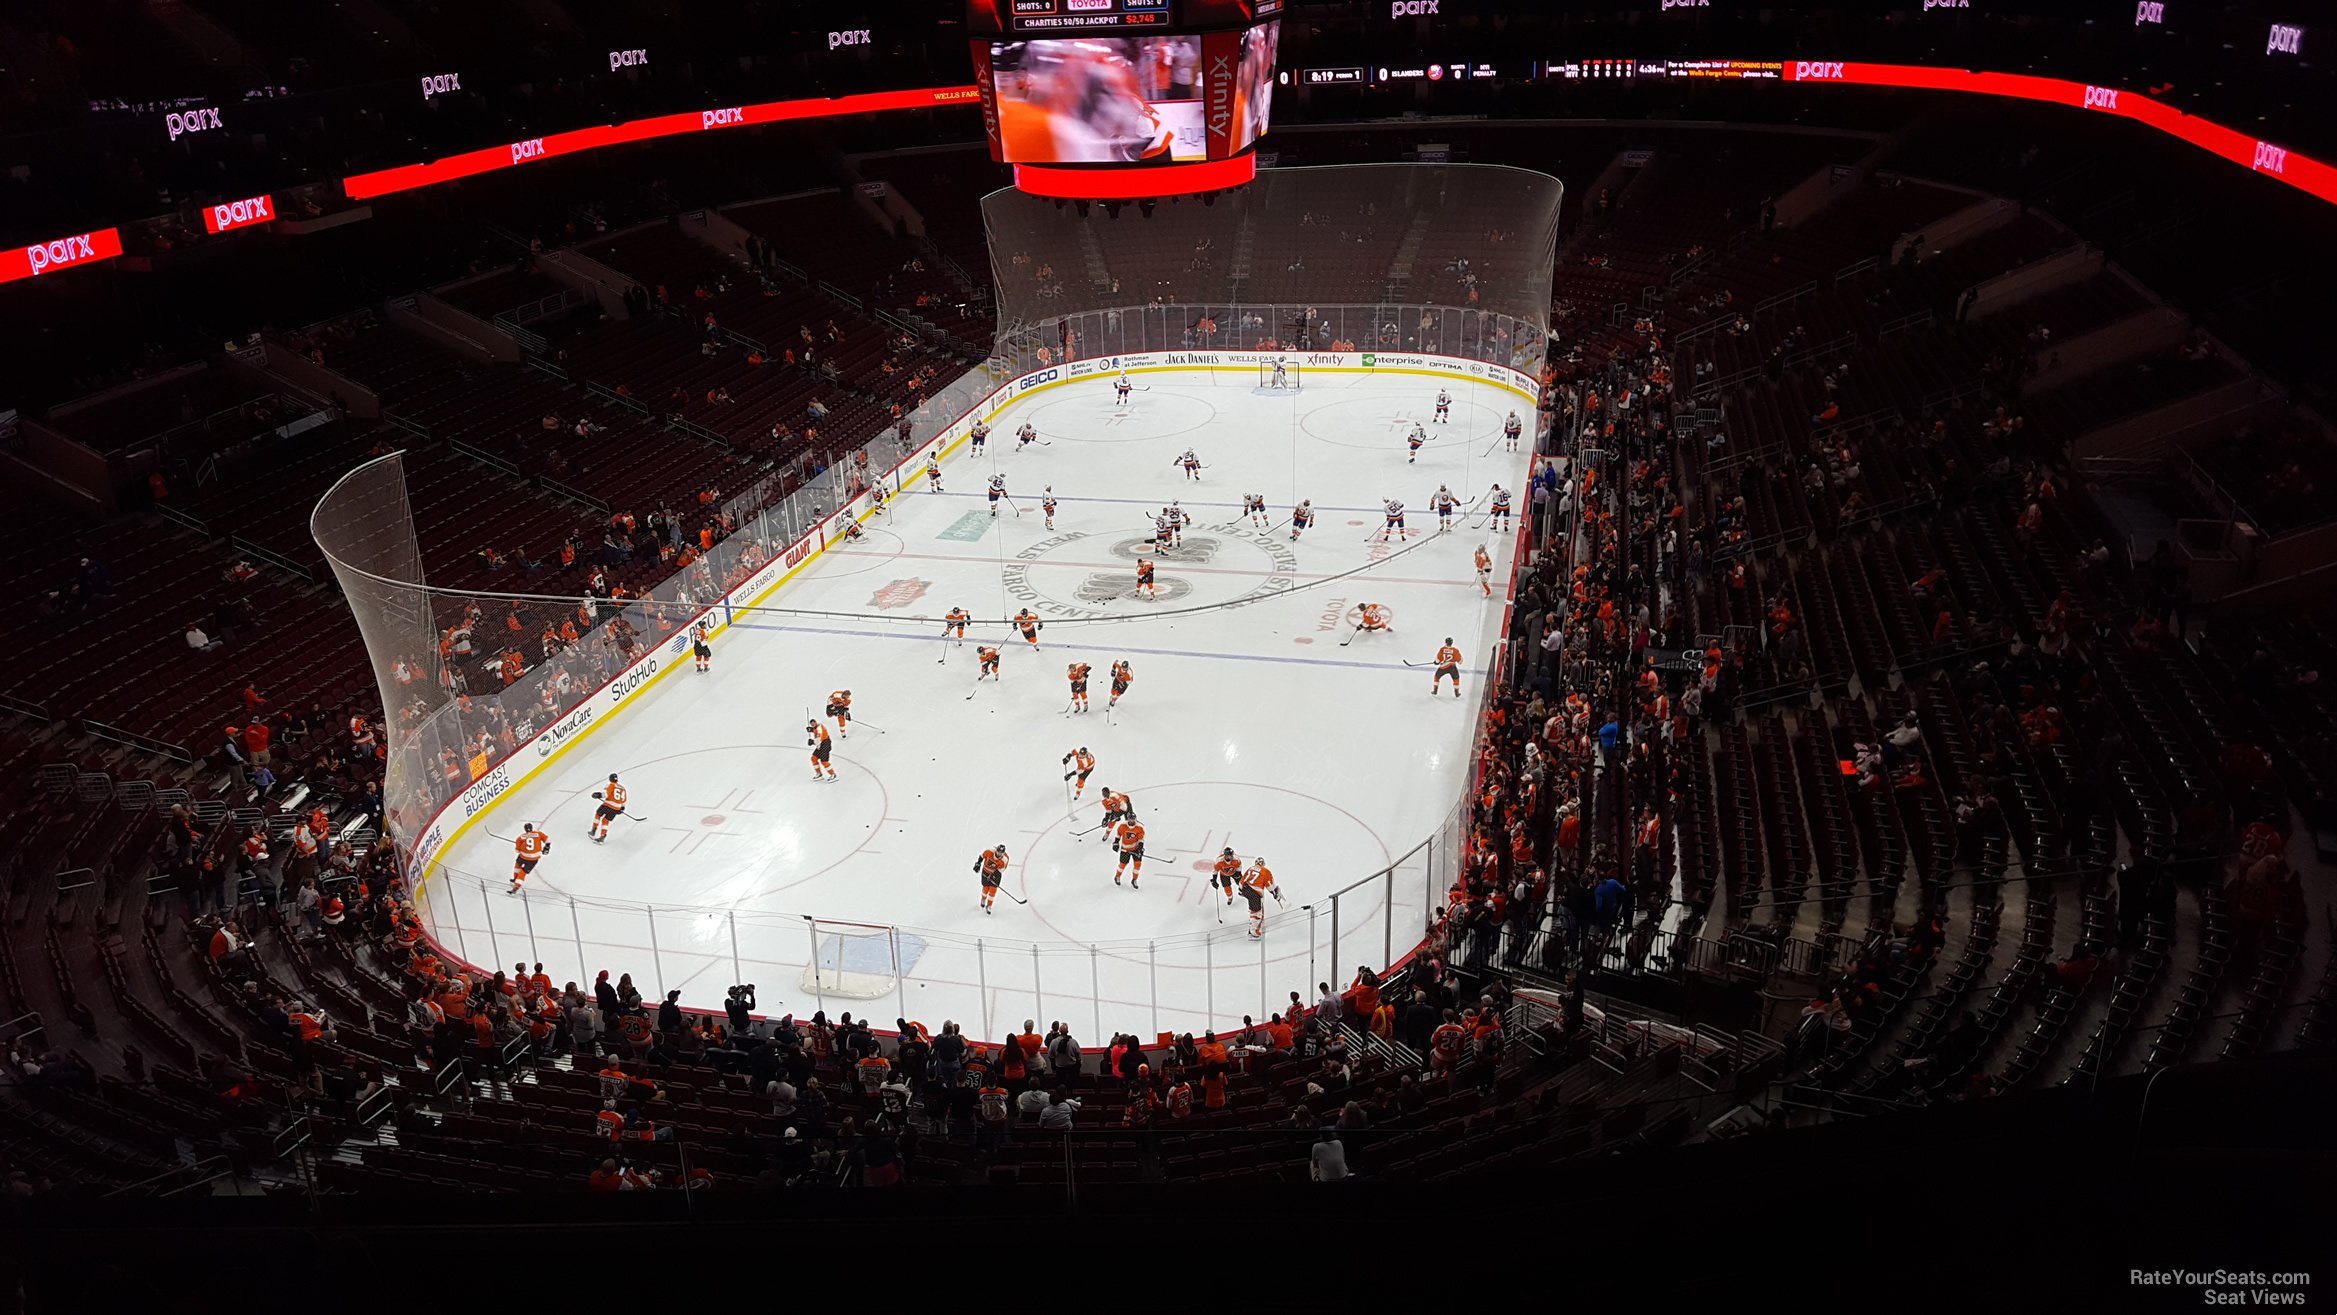 section 220, row 8 seat view  for hockey - wells fargo center